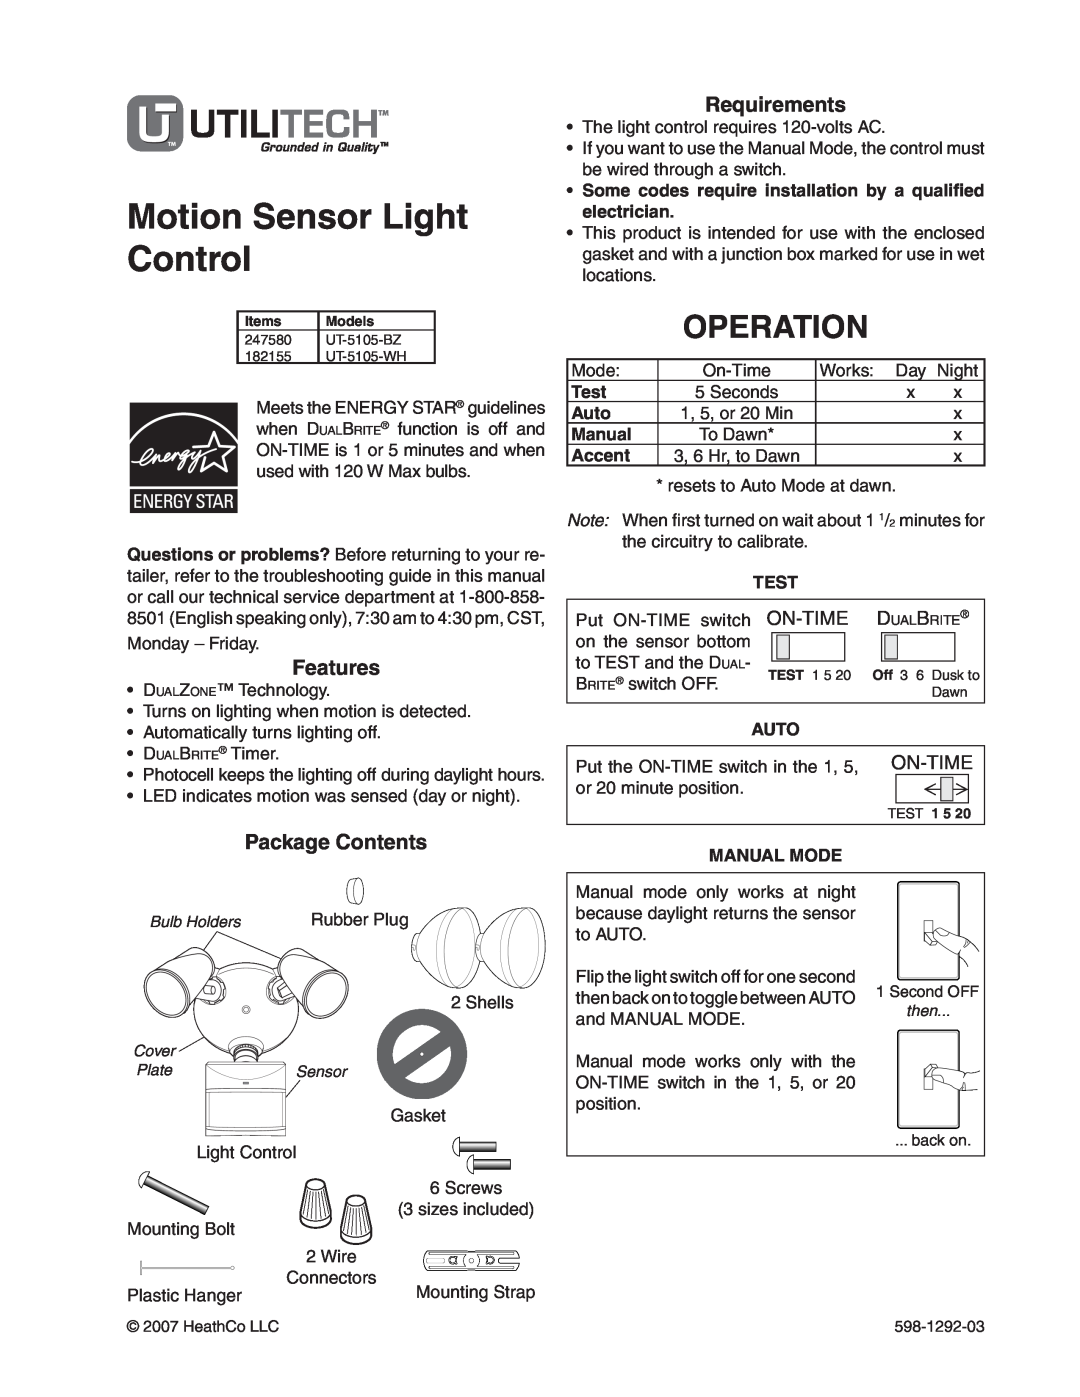 Heath Zenith UT-5105-WH, UT-5105-BZ package contents manual Motion Sensor Light Control, Operation, On-Time, Rubber Plug 